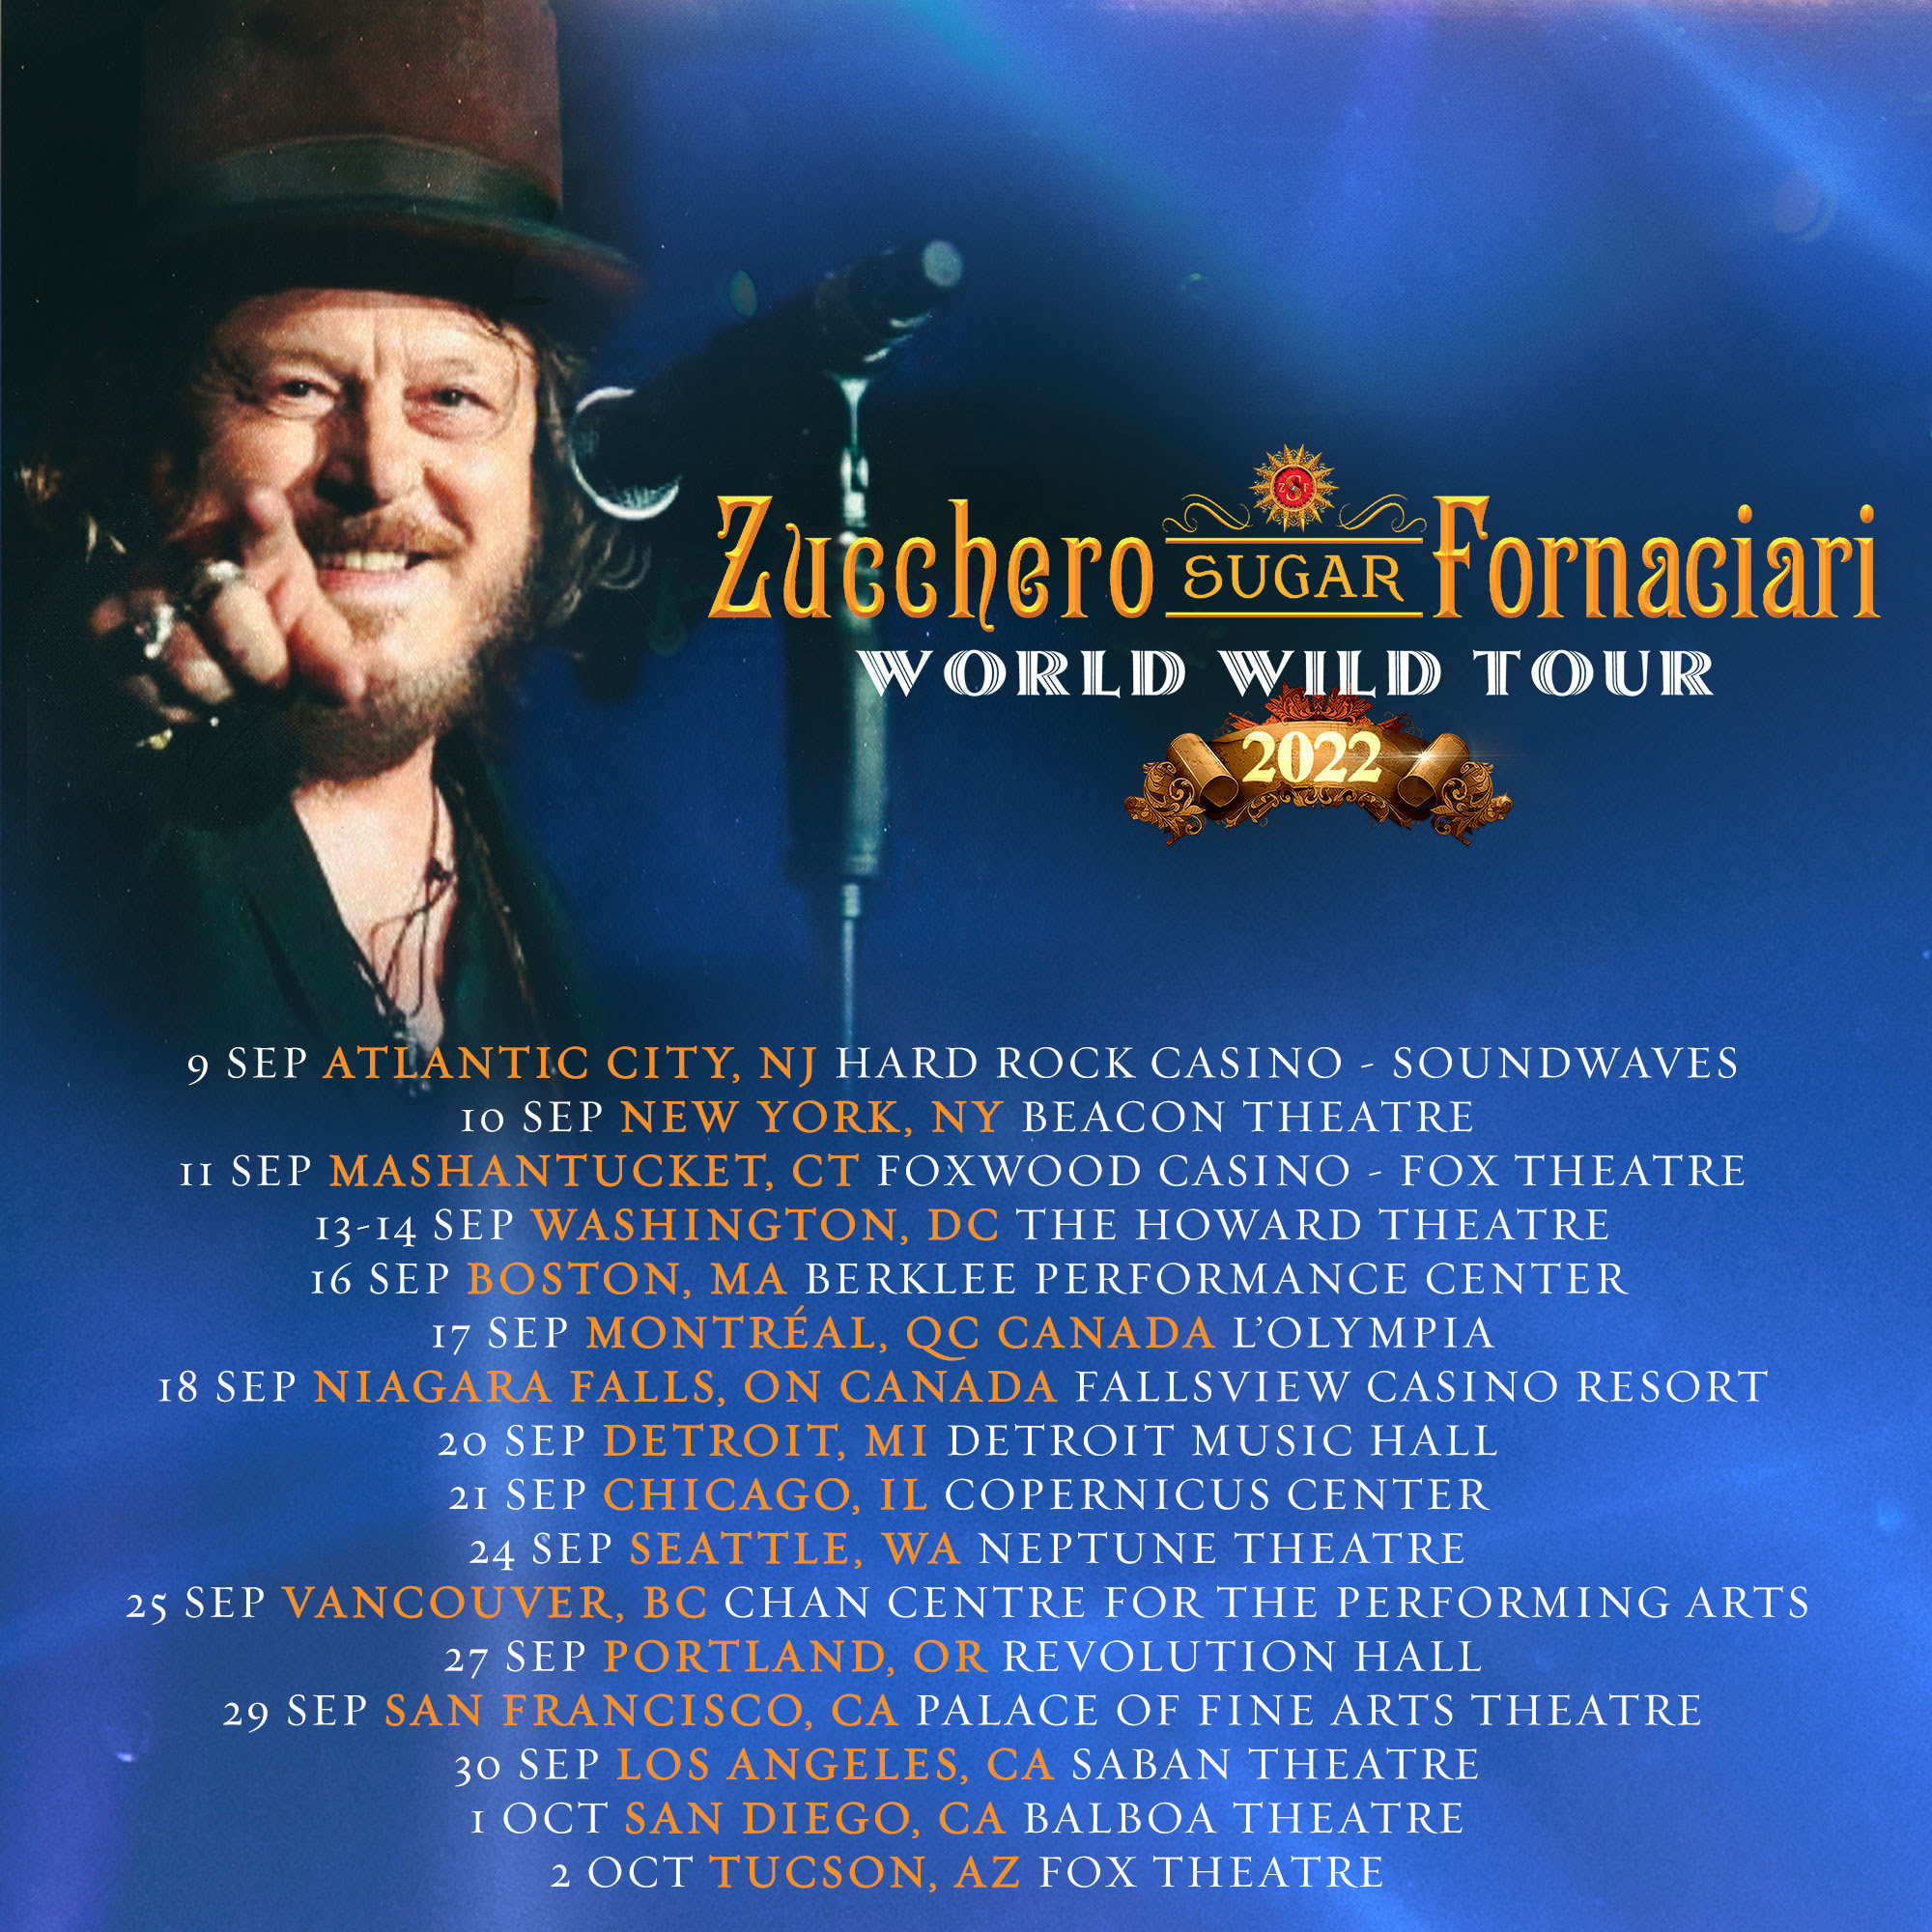 Zucchero opens for The Rolling Stones on "World Wild Tour"